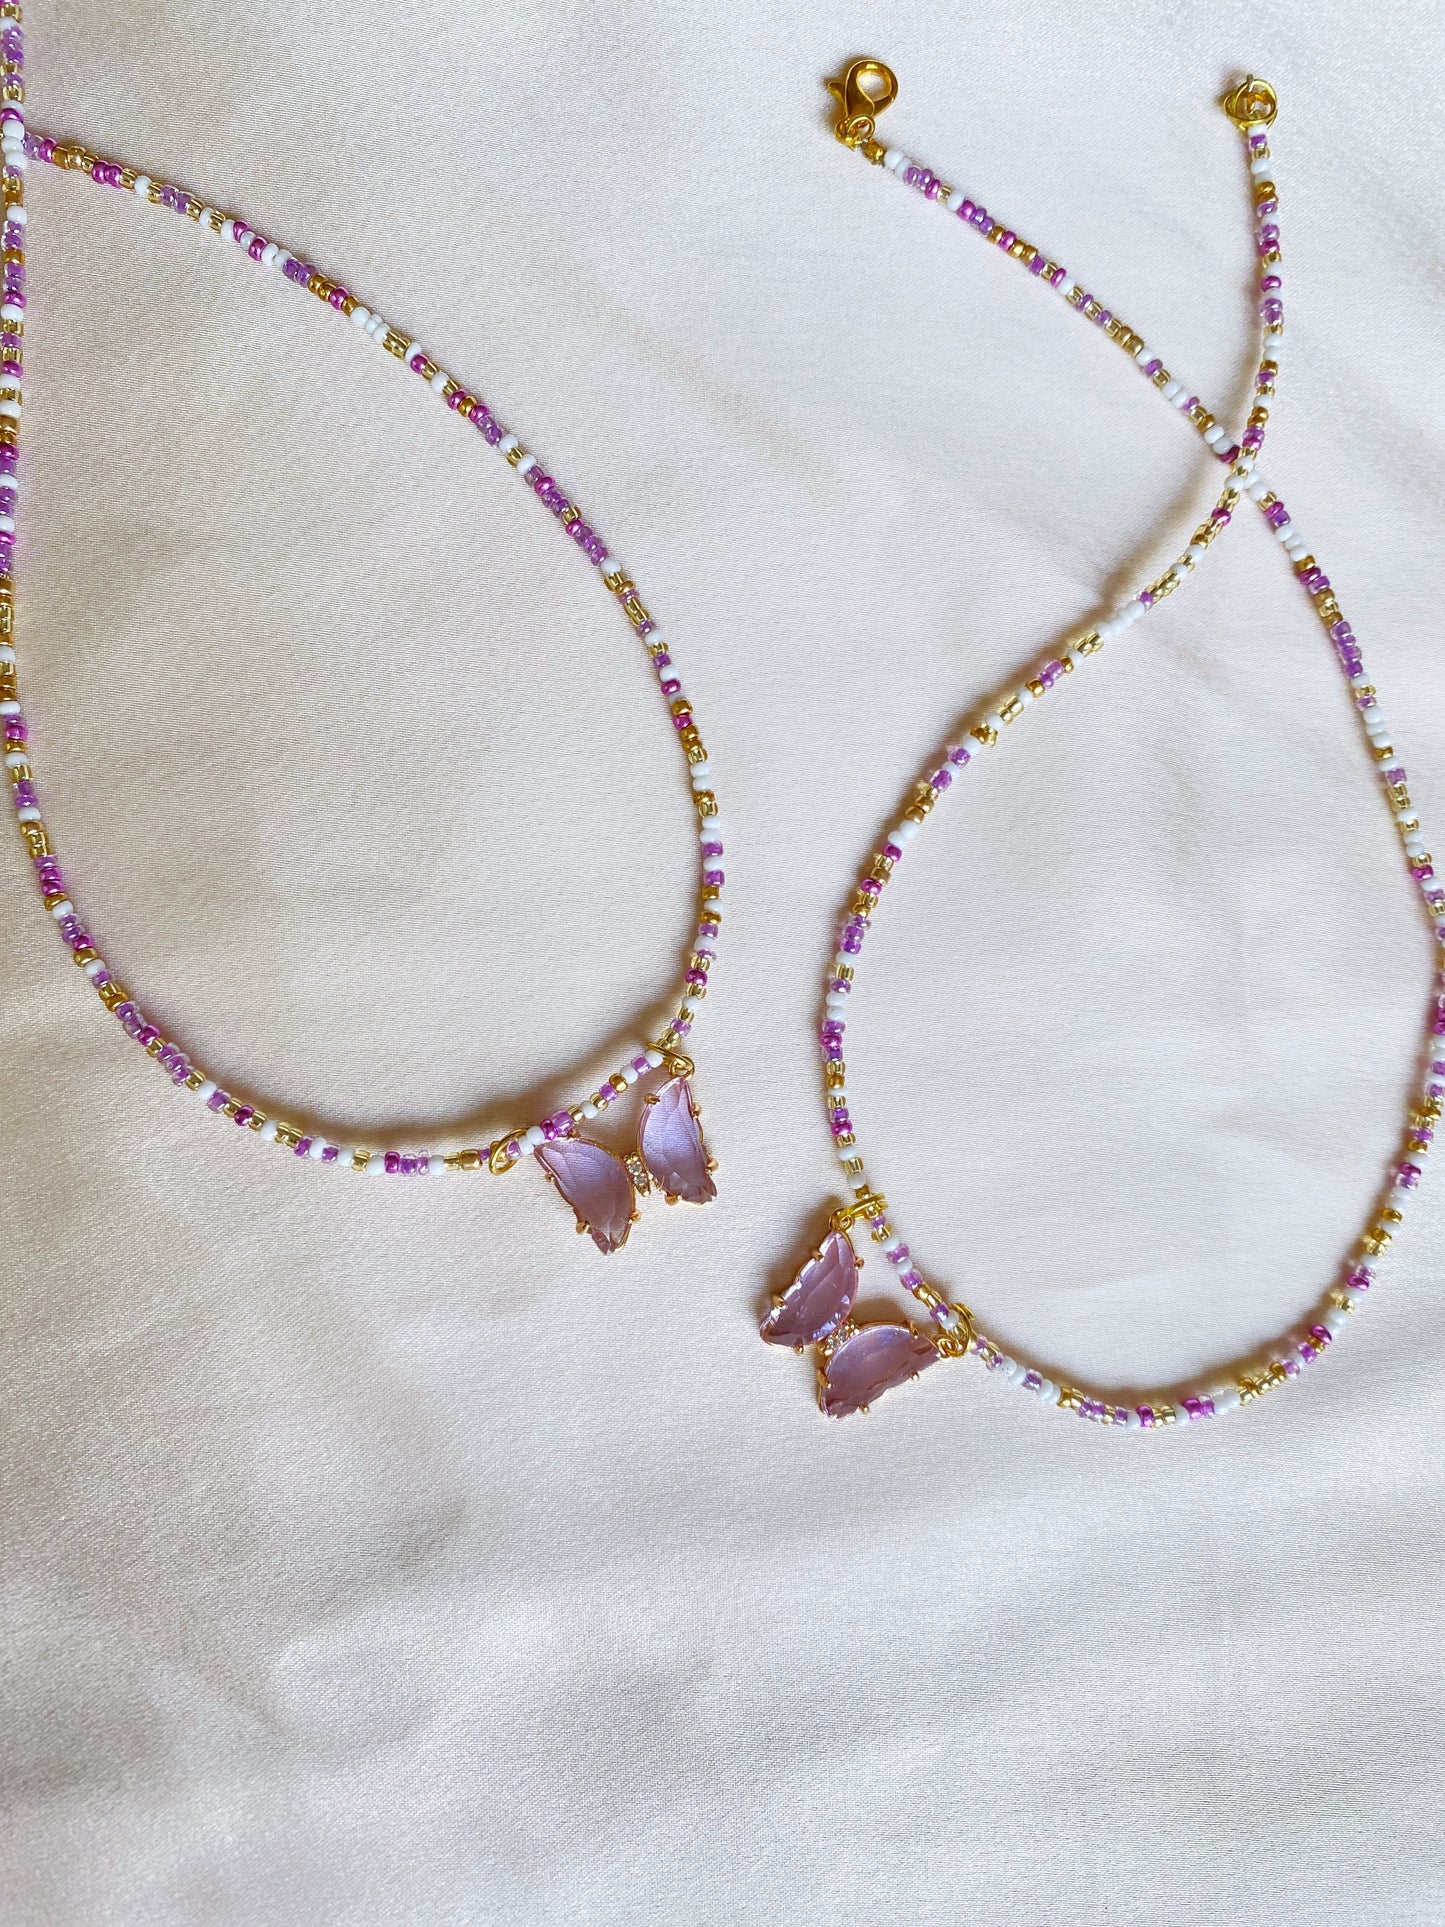 LILAC BUTTERFLY BEADS NECKLACE